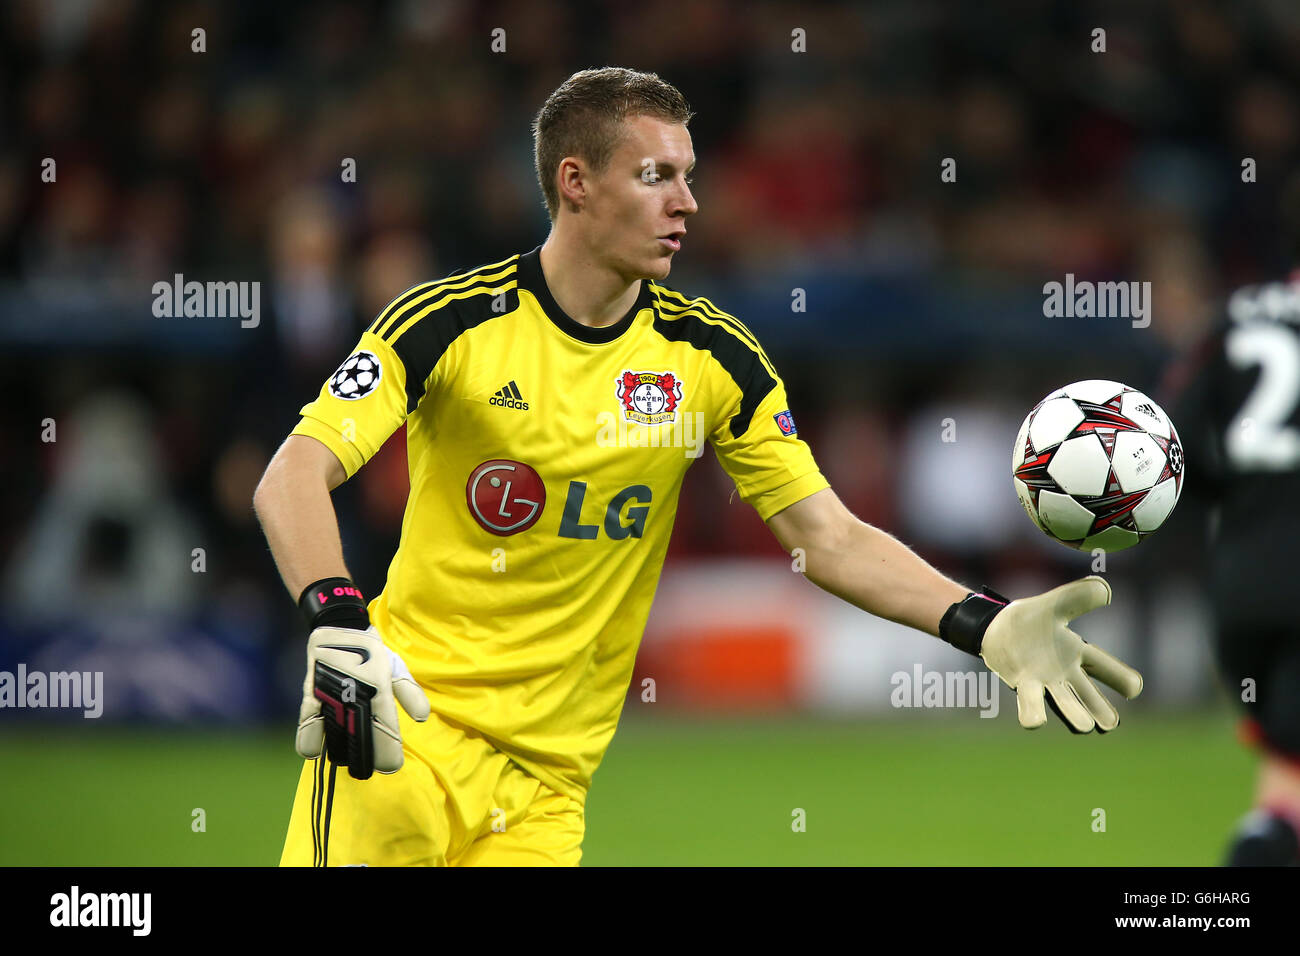 Bayer Leverkusen Leno High Resolution Stock Photography and Images - Alamy